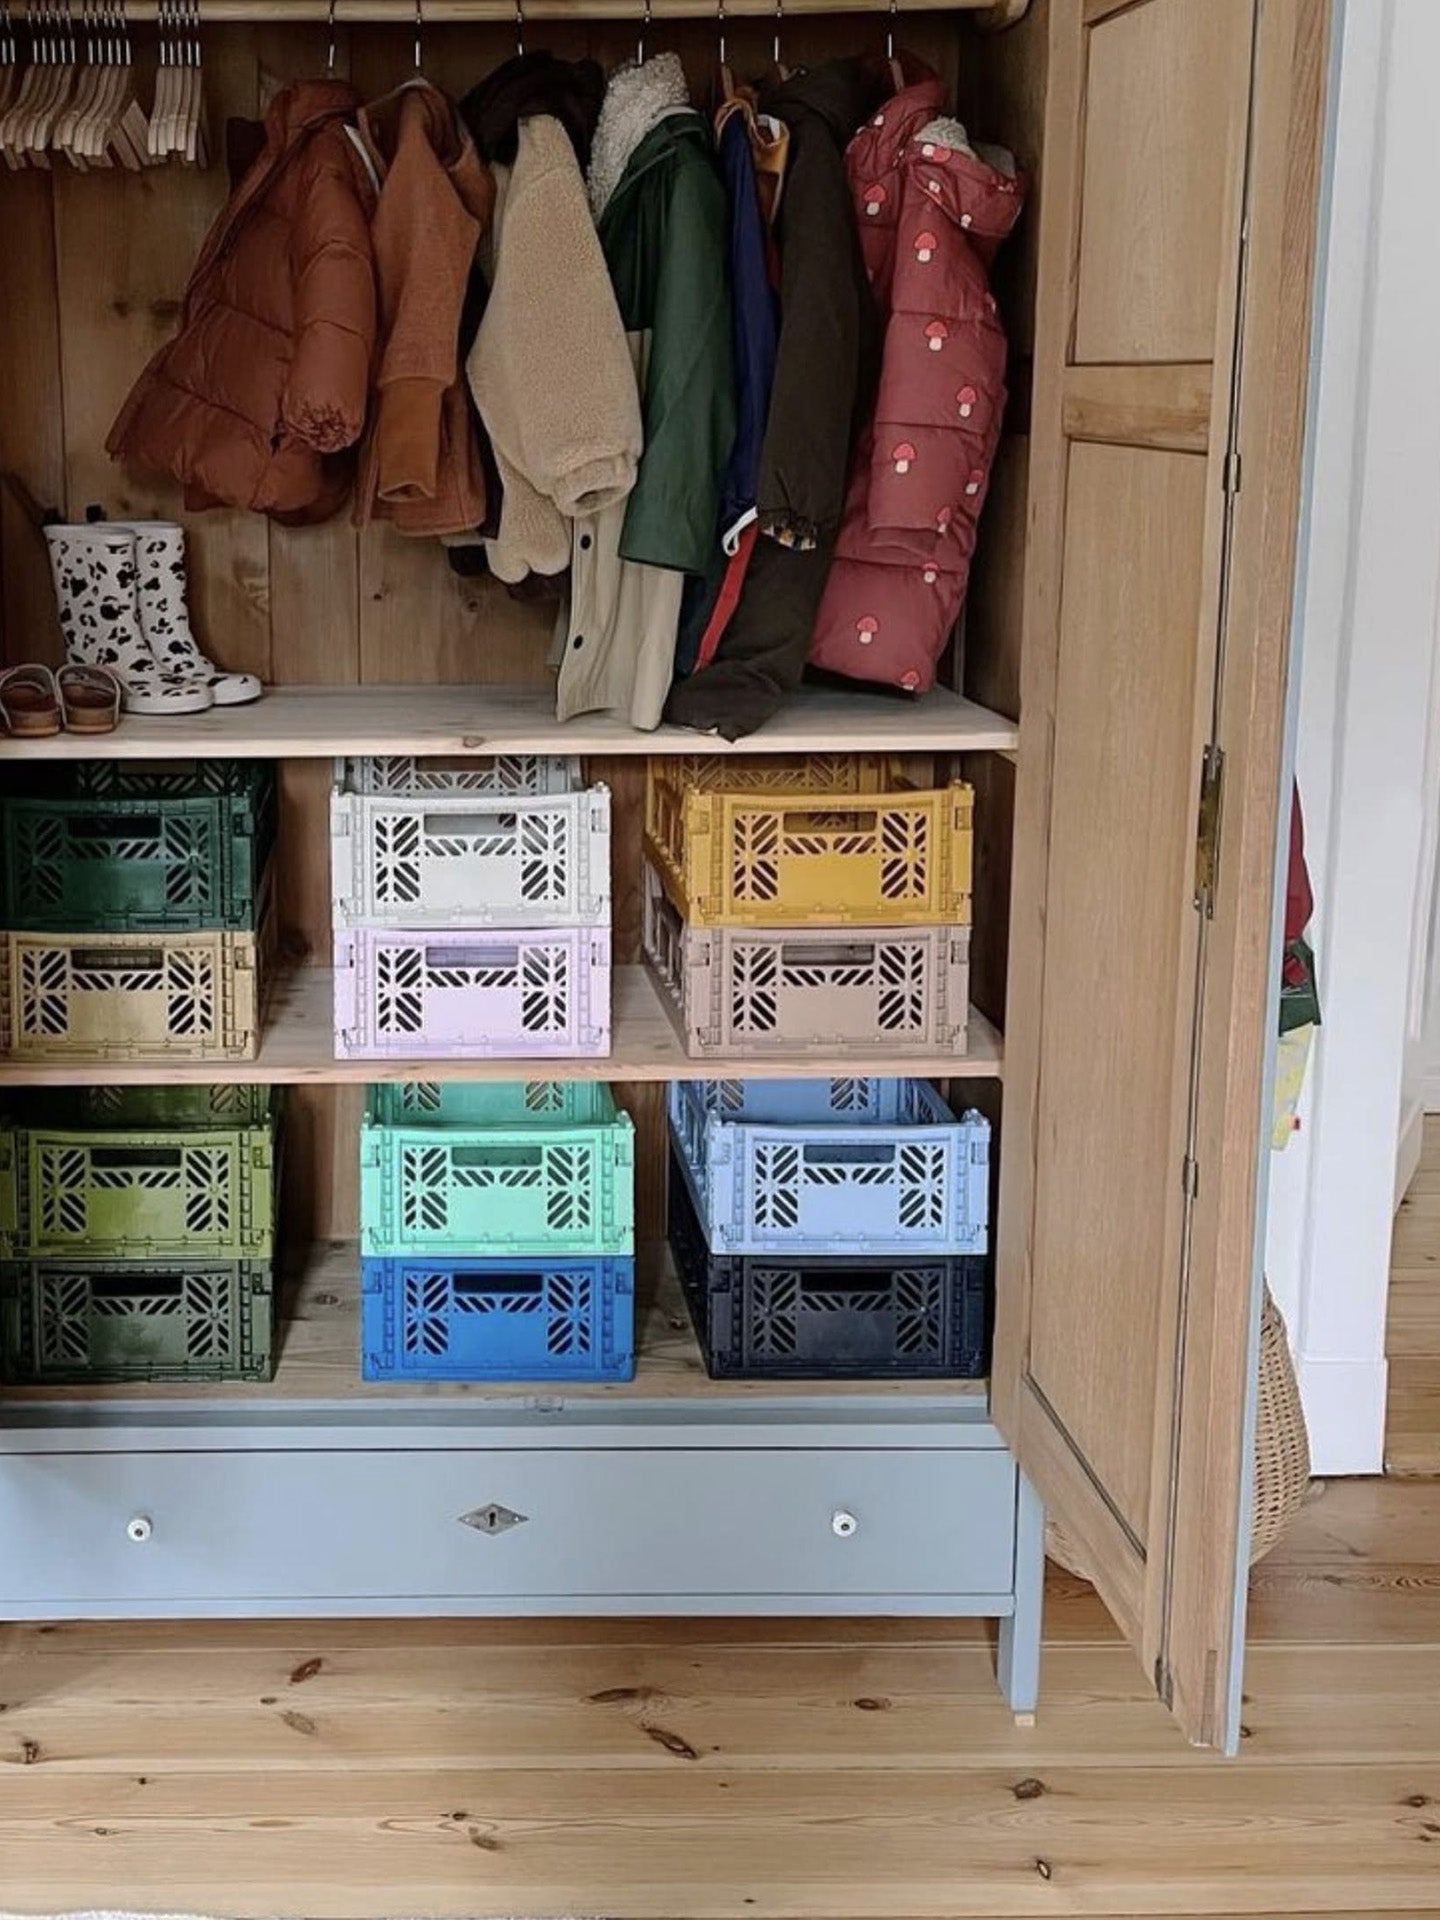 Aykasa storage crates are stylish and handy for keeping knits and underwear organised in the closet. With different colours it's easy to separate which clothing item belongs into which box. Or buy all in one shade to keep the look more calm!